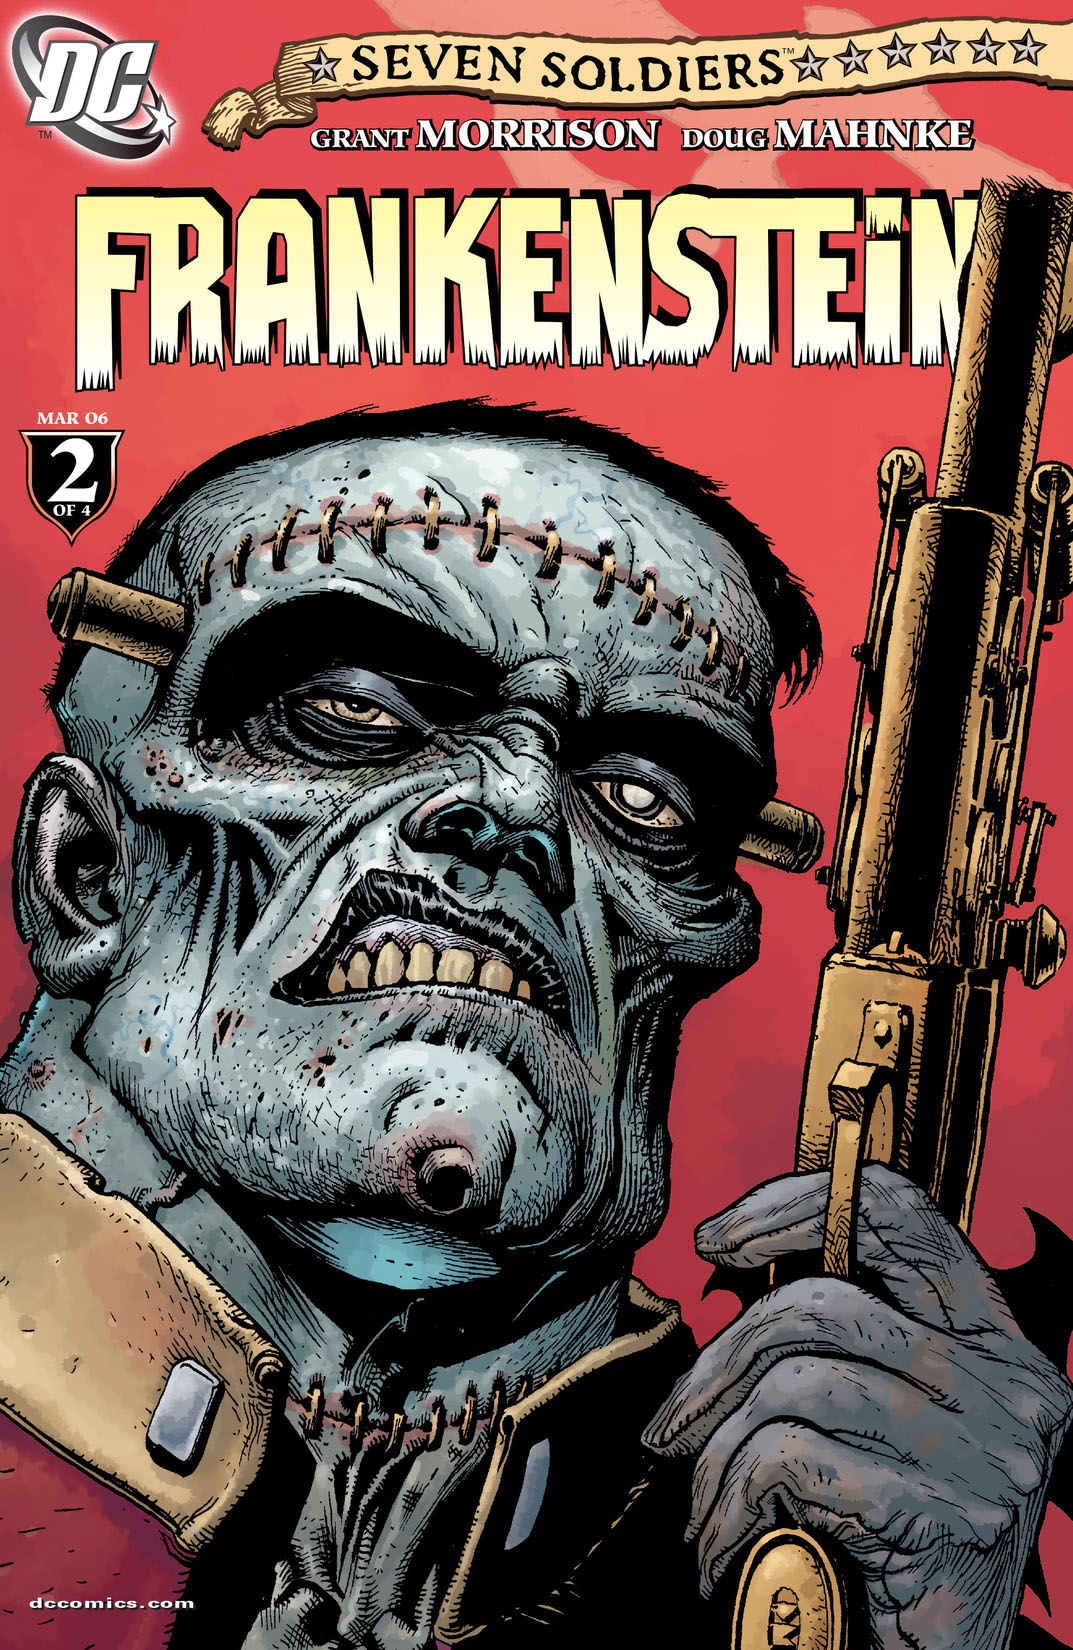 Seven Soldiers: Frankenstein #2 preview images